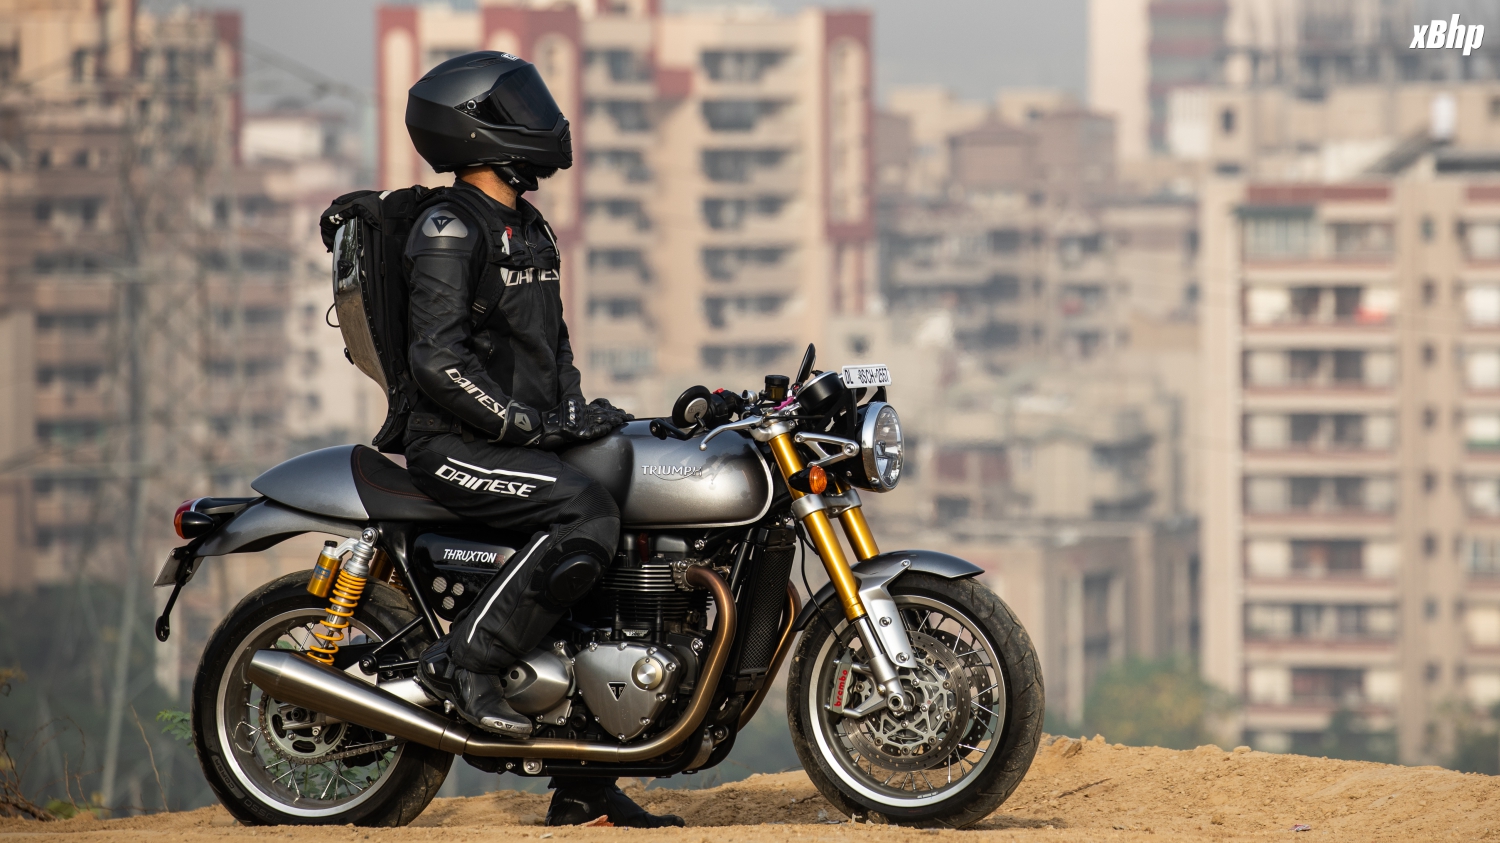 Triumph S Delightful Cafe Racer Thruxton 1200r Reviewed Xbhp Com The Global Indian Biking Community